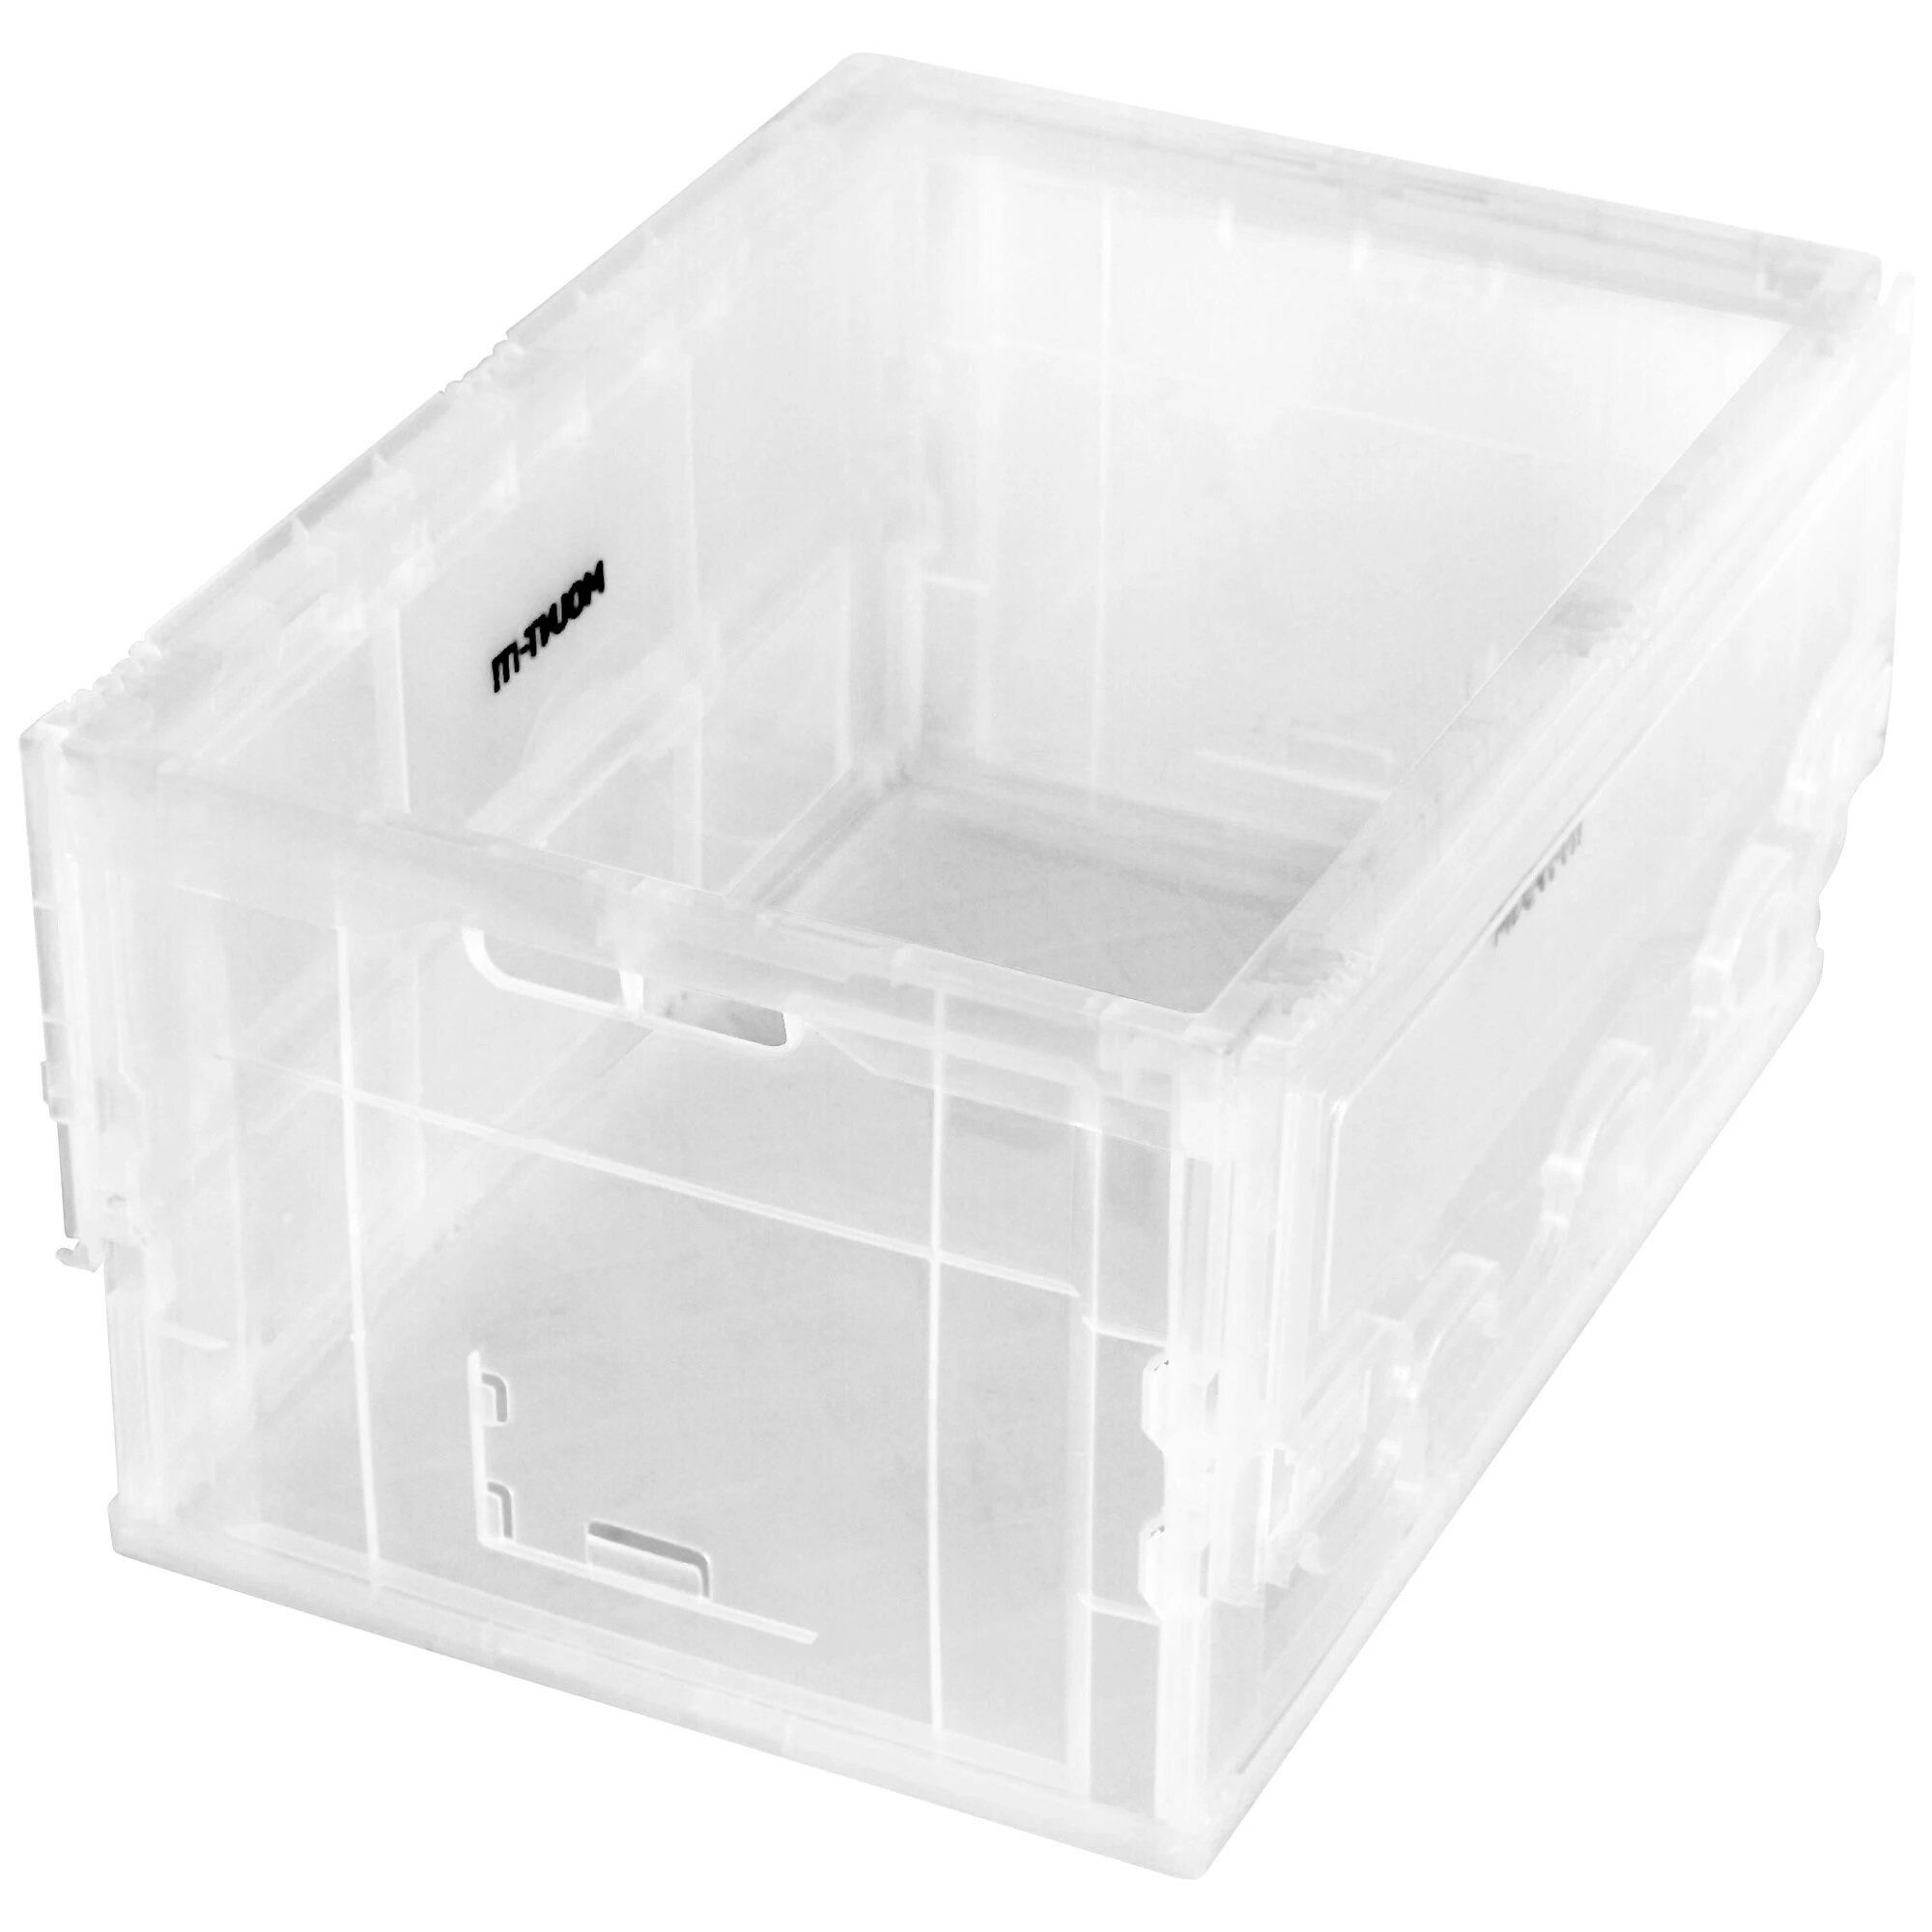 Mount-It! Folding Plastic Storage Crate, Collapsible Utility